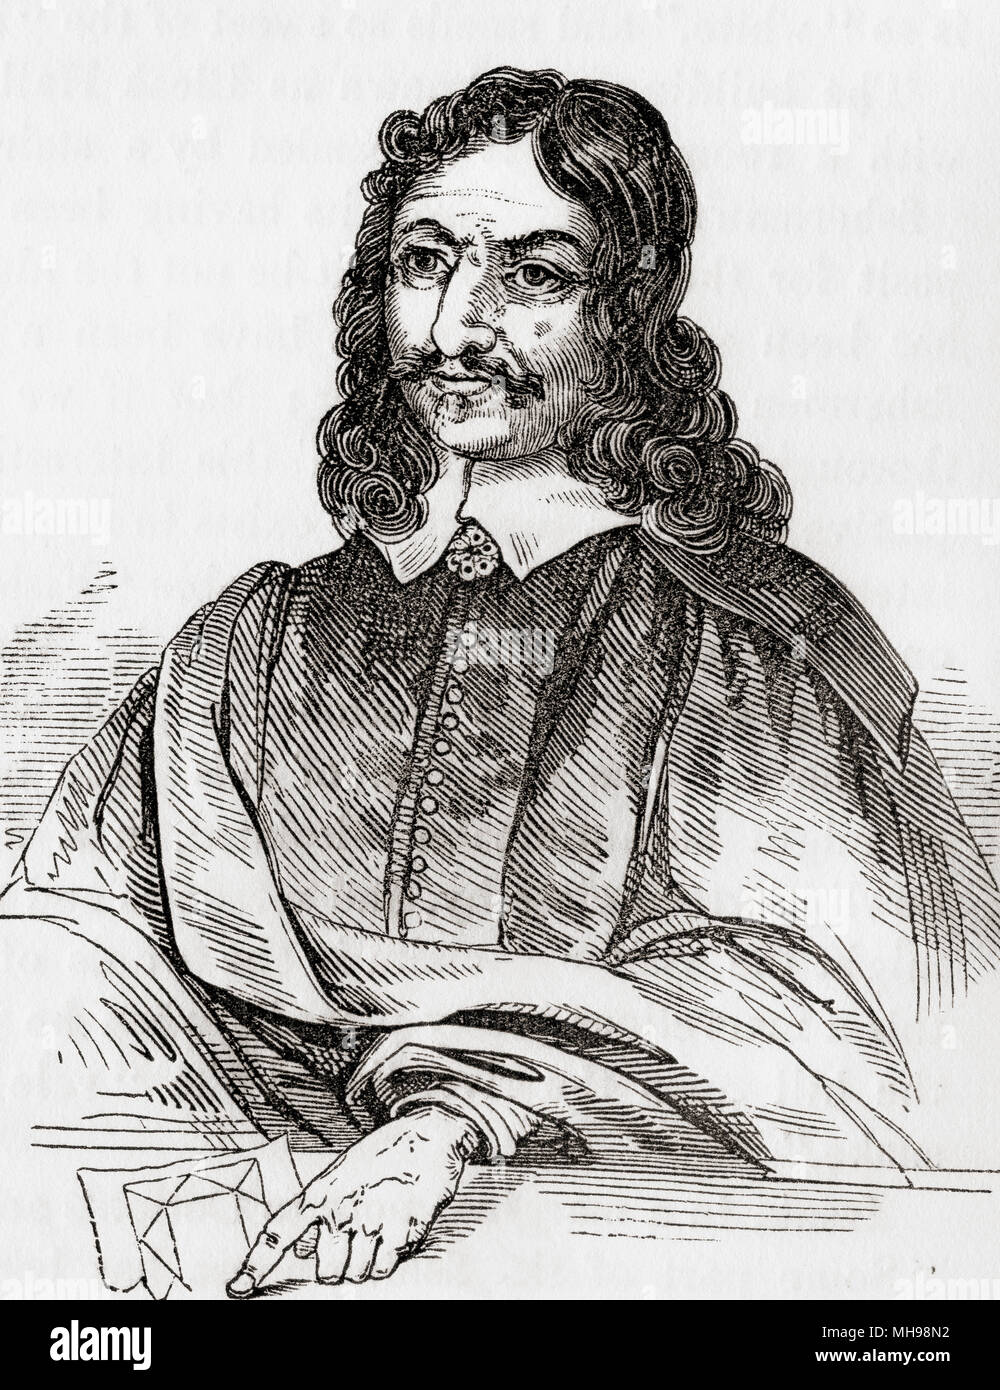 William Lilly, 1602 – 1681.  English astrologer, author, translator and astrological consultant.   From Old England: A Pictorial Museum, published 1847. Stock Photo